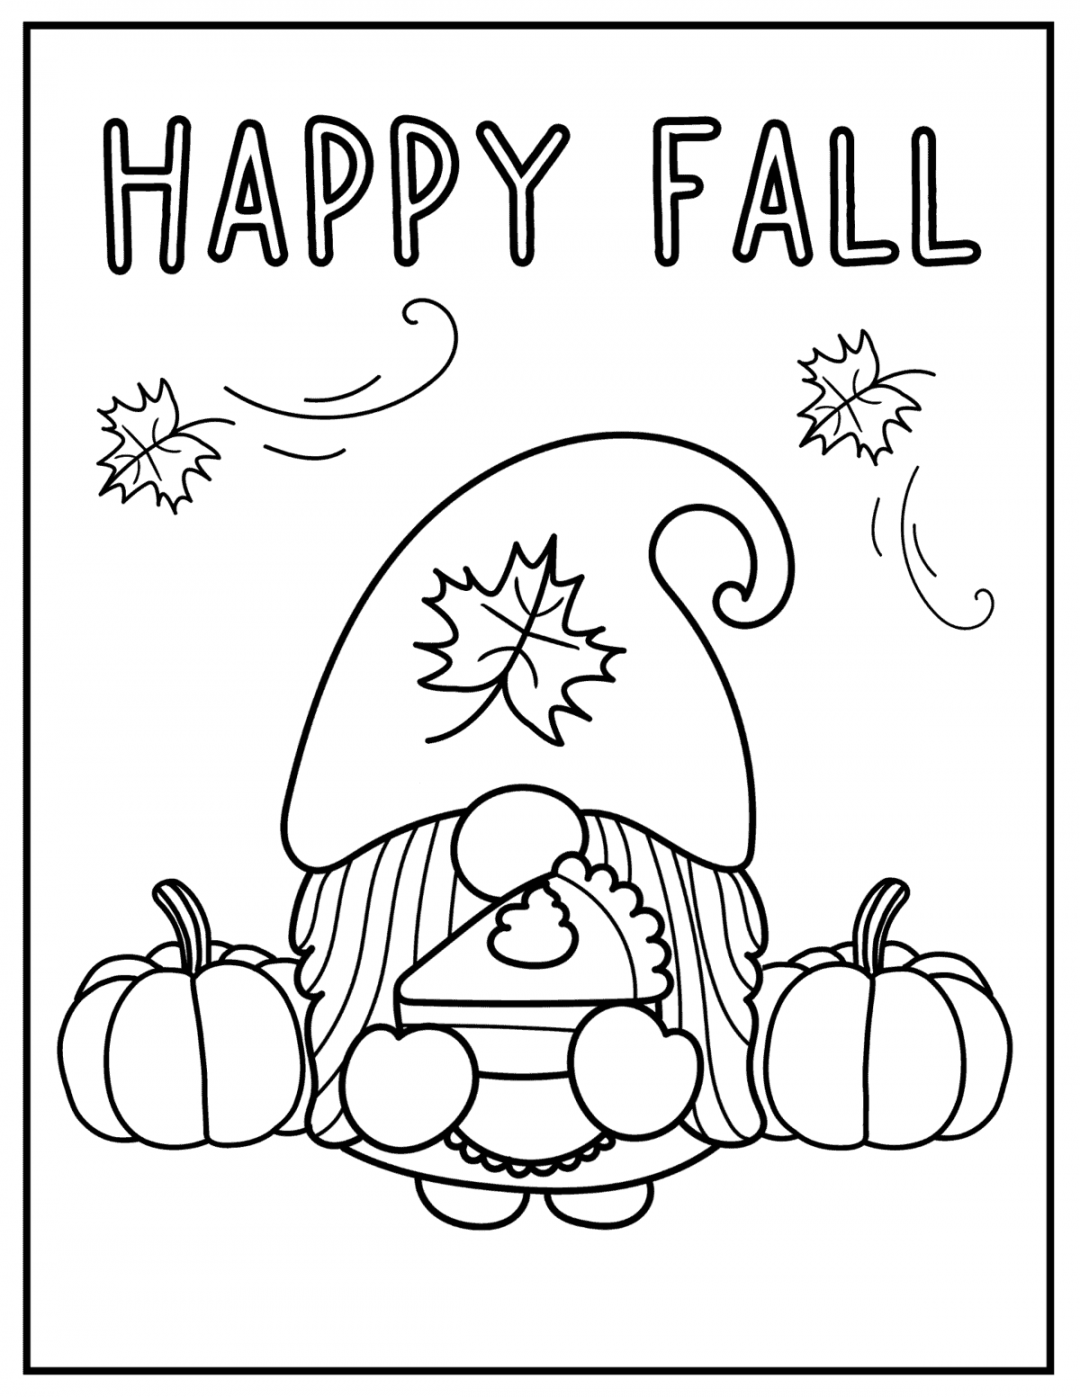 Free Printable Fall Coloring Pages - Printable -  Free Printable Fall Coloring Pages - Prudent Penny Pincher